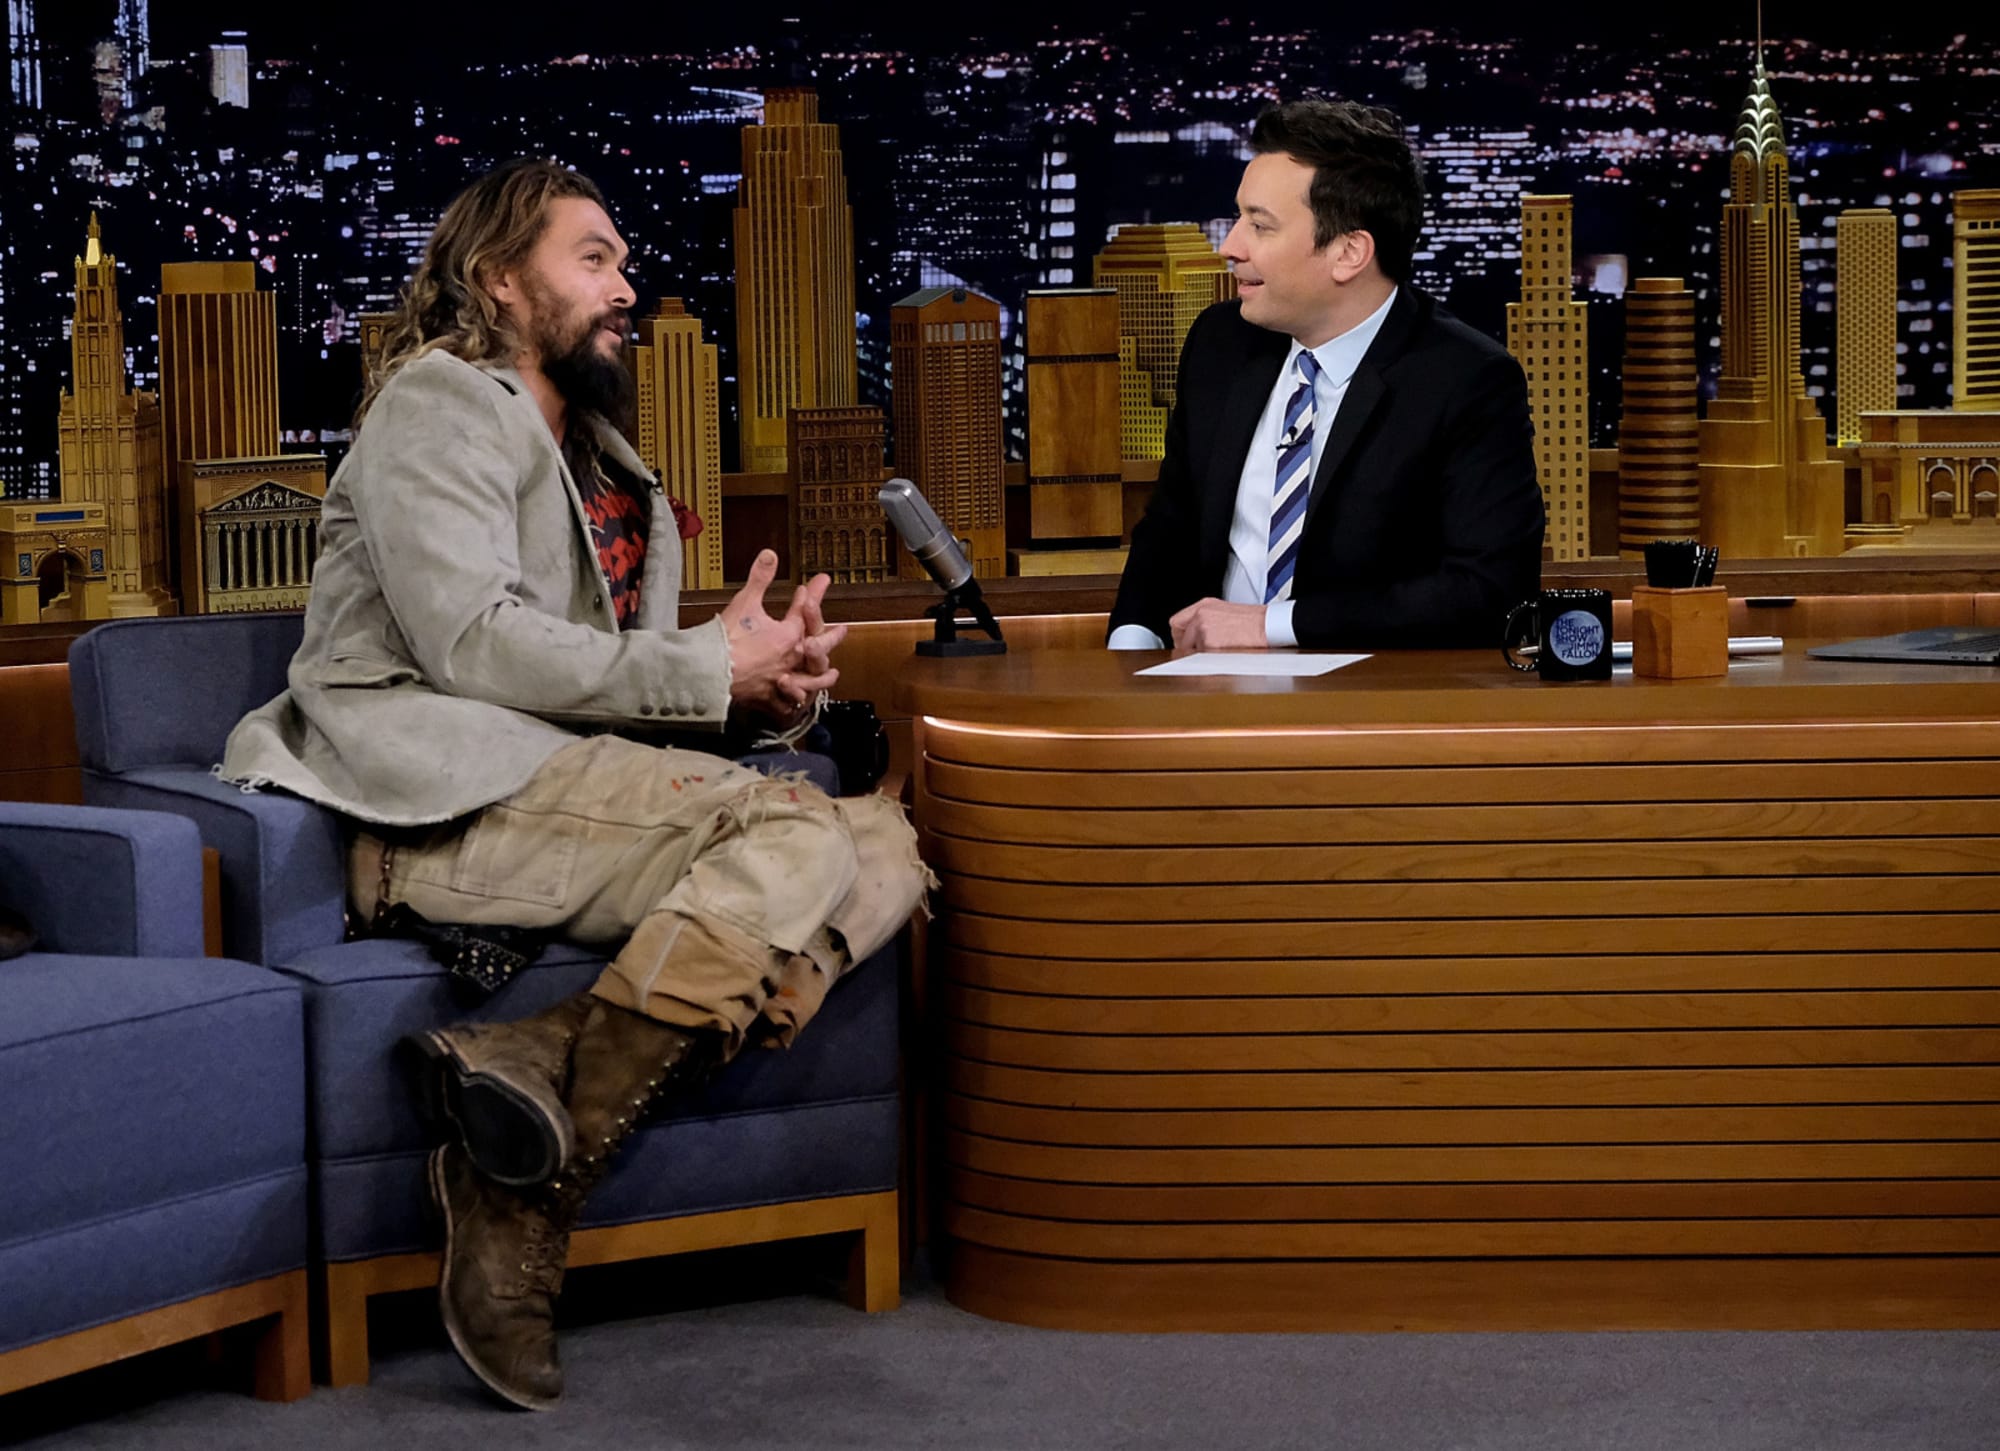 Late night ratings report: Viewership drops but Jimmy Fallon stays on top